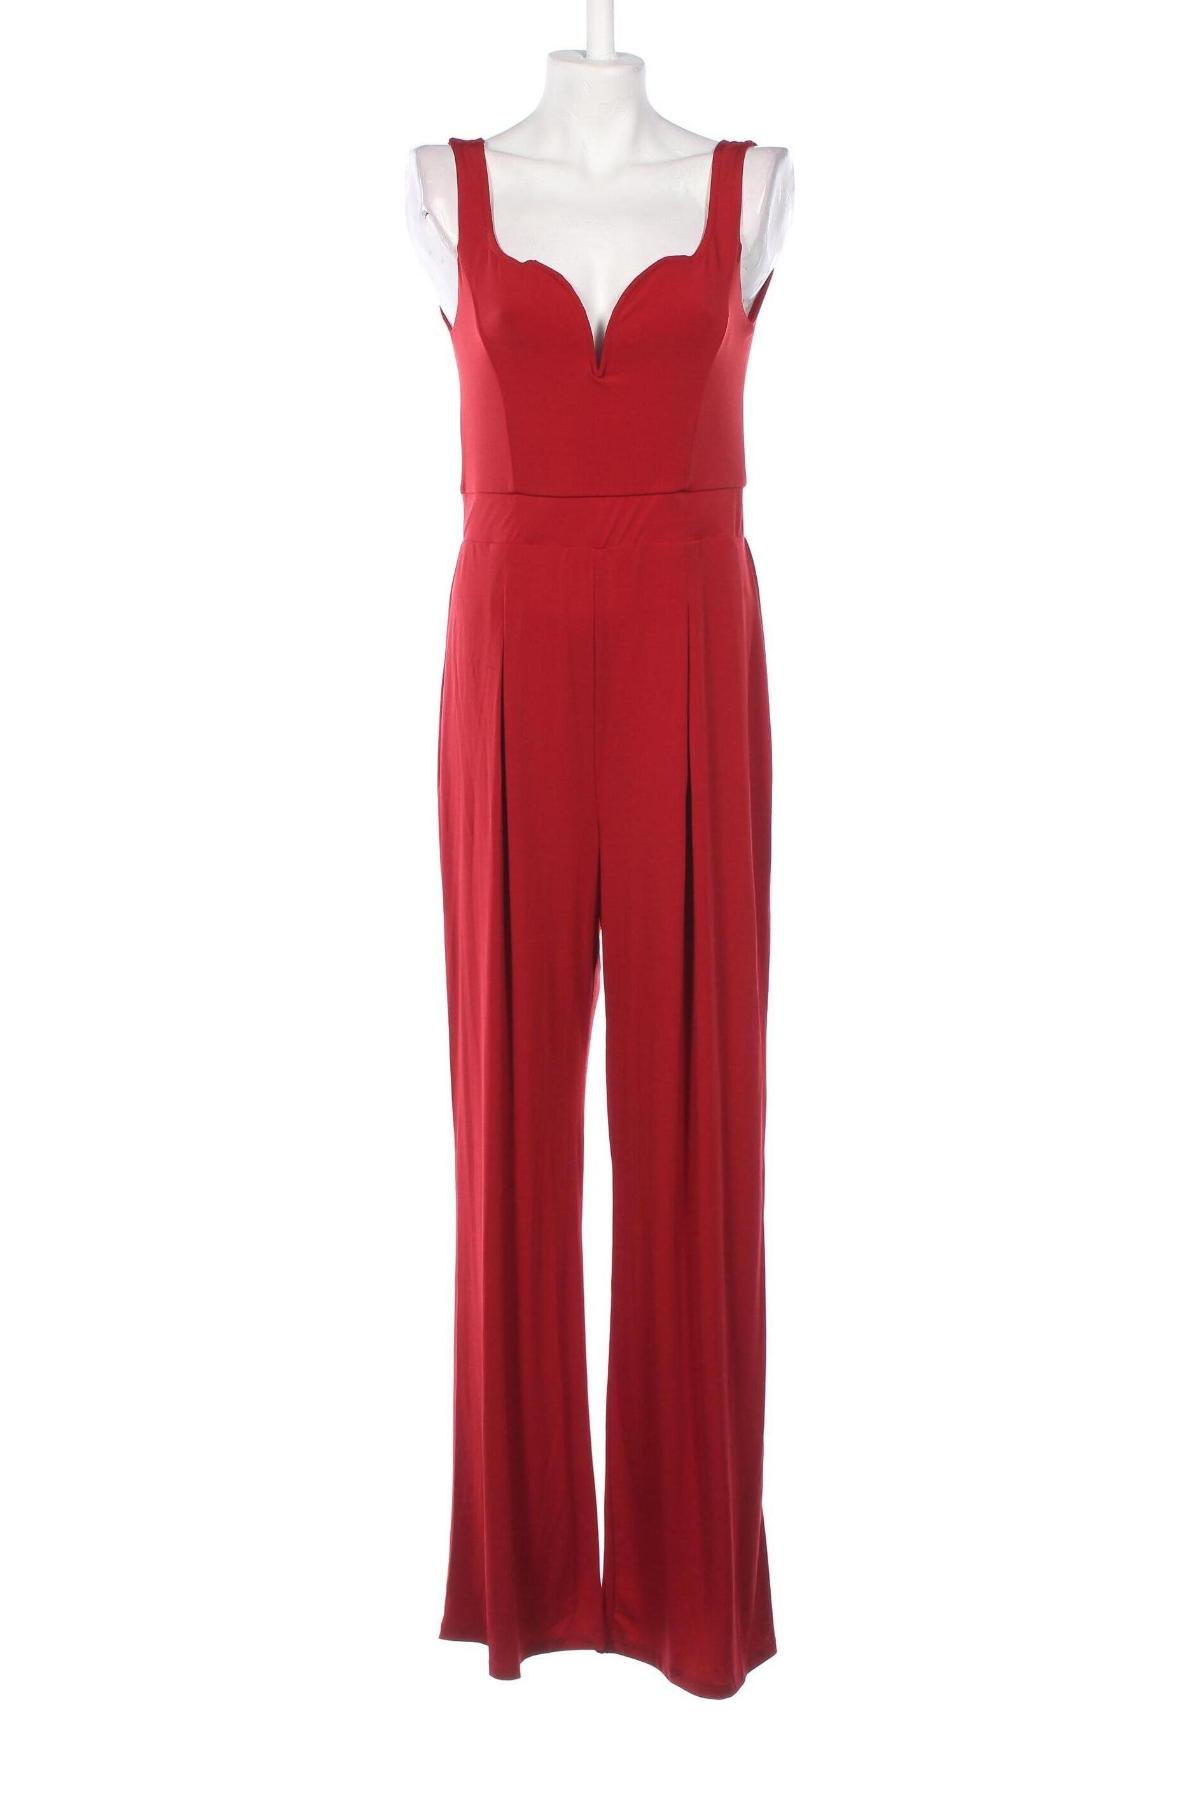 Damen Overall About You, Größe M, Farbe Rot, Preis 31,96 €